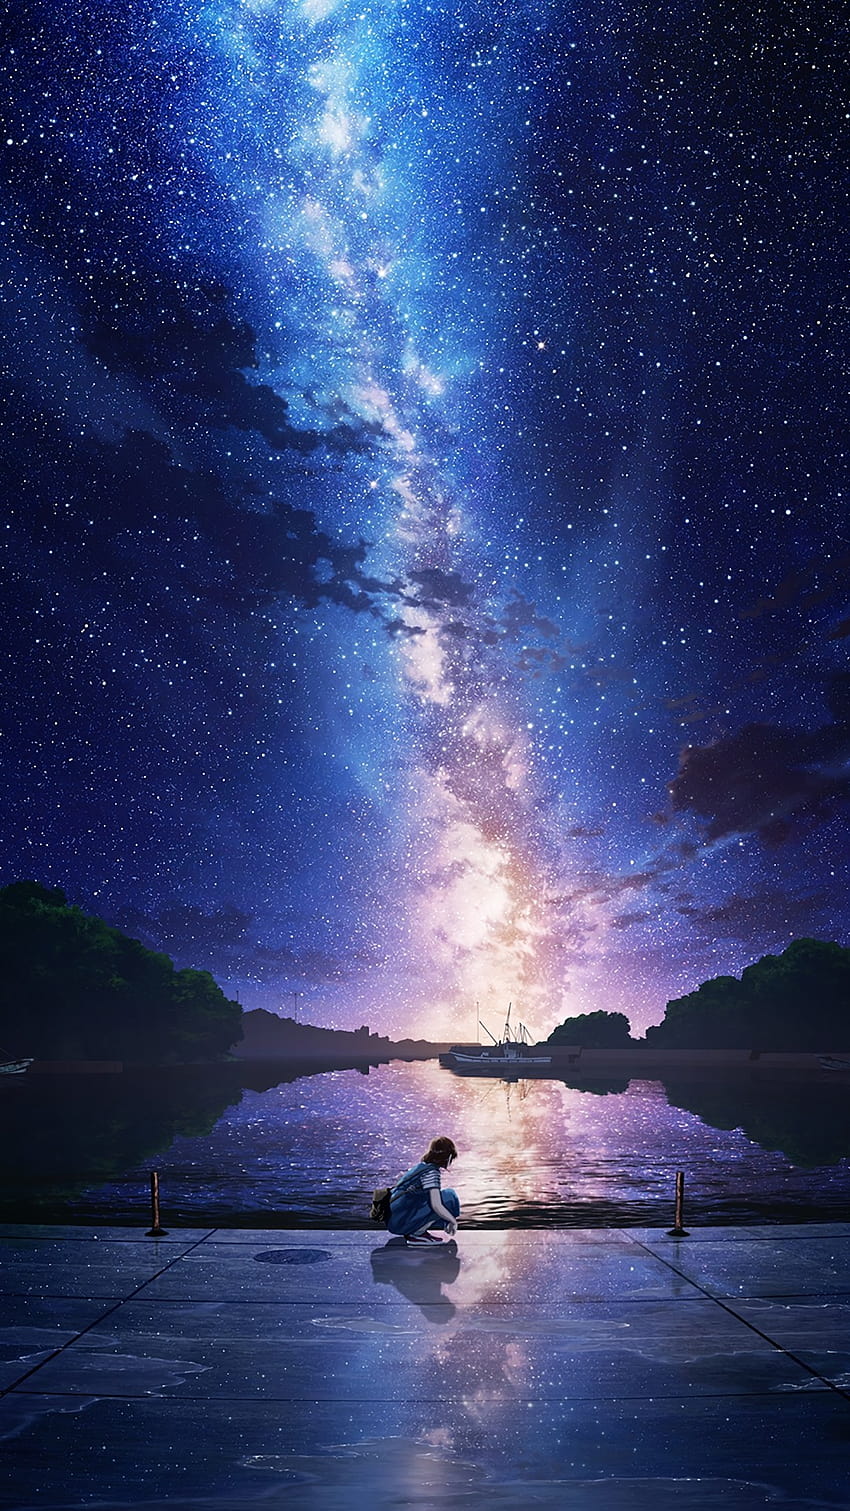 1080x1920 Anime Landscape, Stars, Night, Scenic for iPhone 8, iPhone 7 Plus, iPhone 6+, Sony Xperia Z, HTC One, anime night scenery HD phone wallpaper